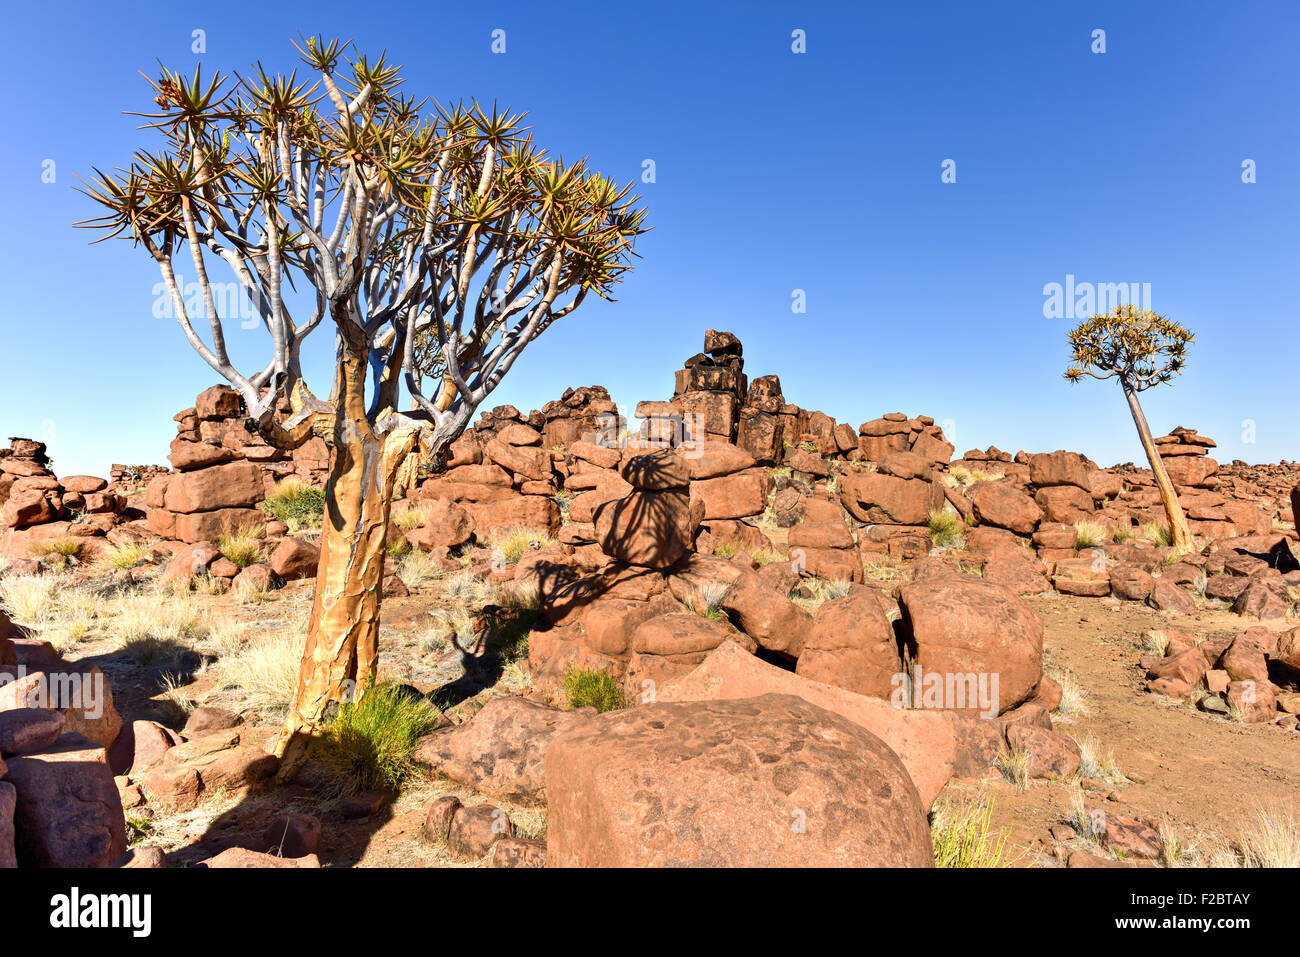 Giant's Playground, a natural rock garden in Keetmanshoop, Namibia. Stock Photo